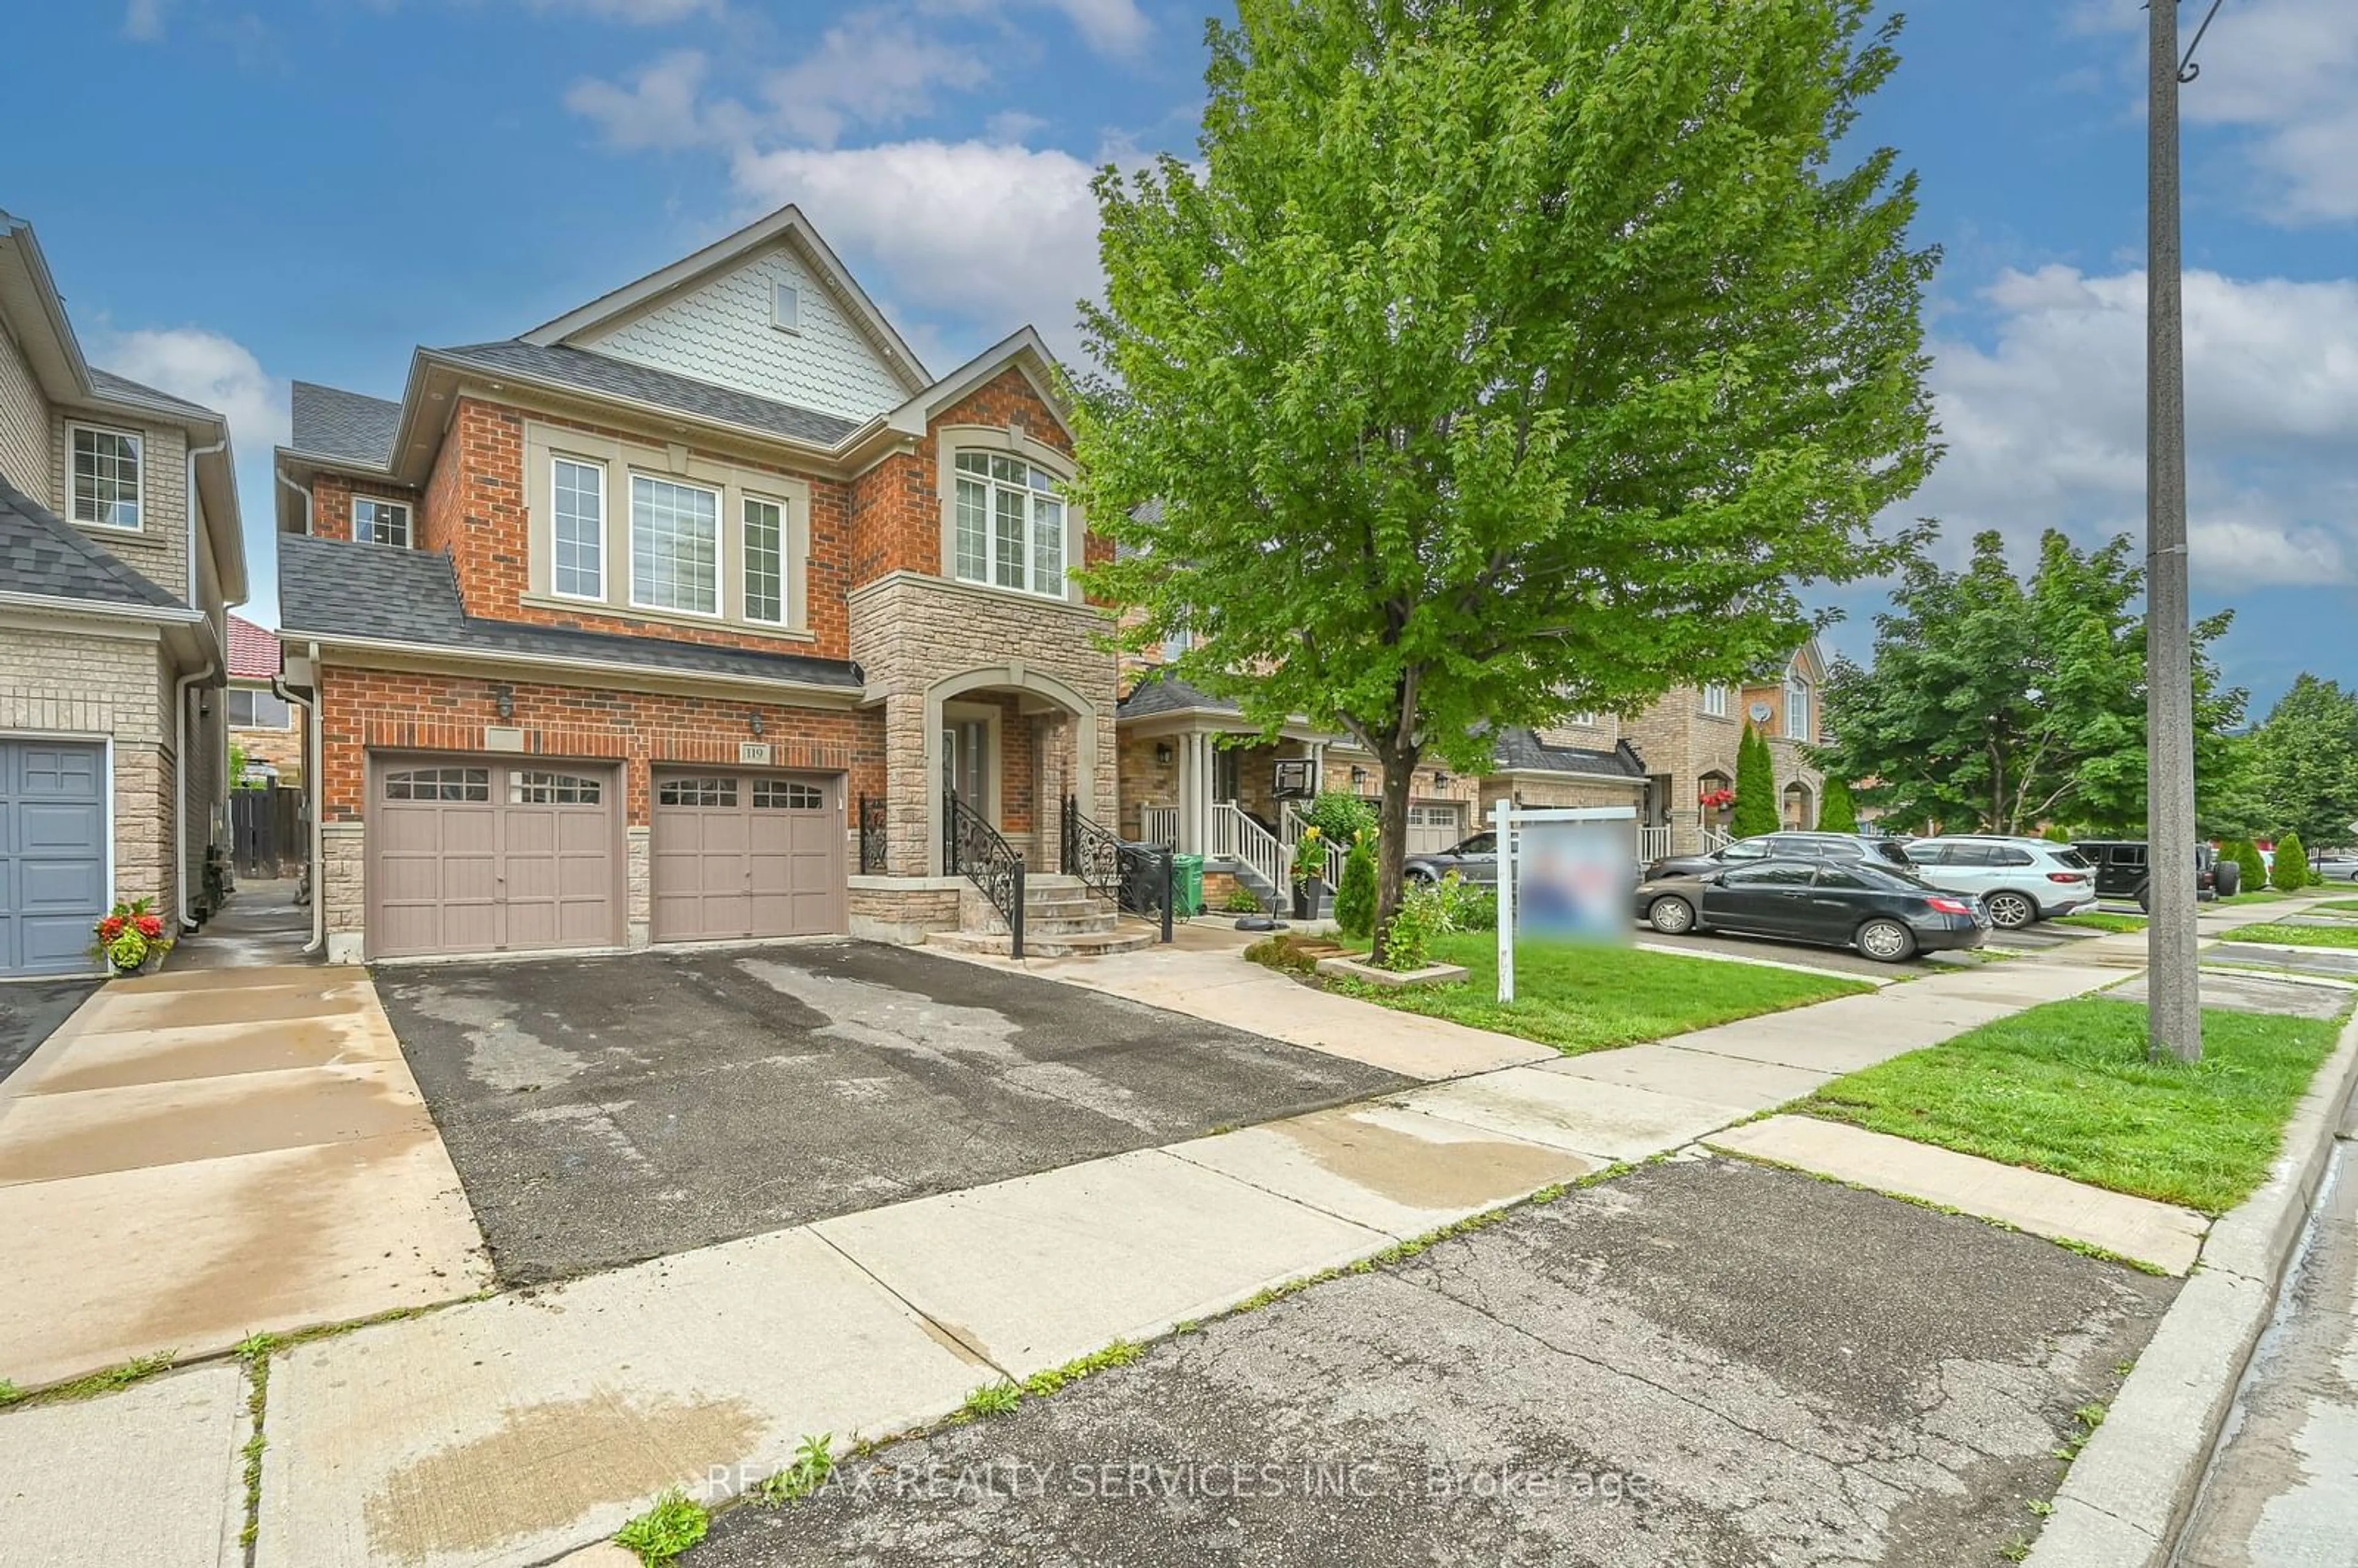 Home with brick exterior material for 119 Crown Victoria Dr, Brampton Ontario L7A 3X9